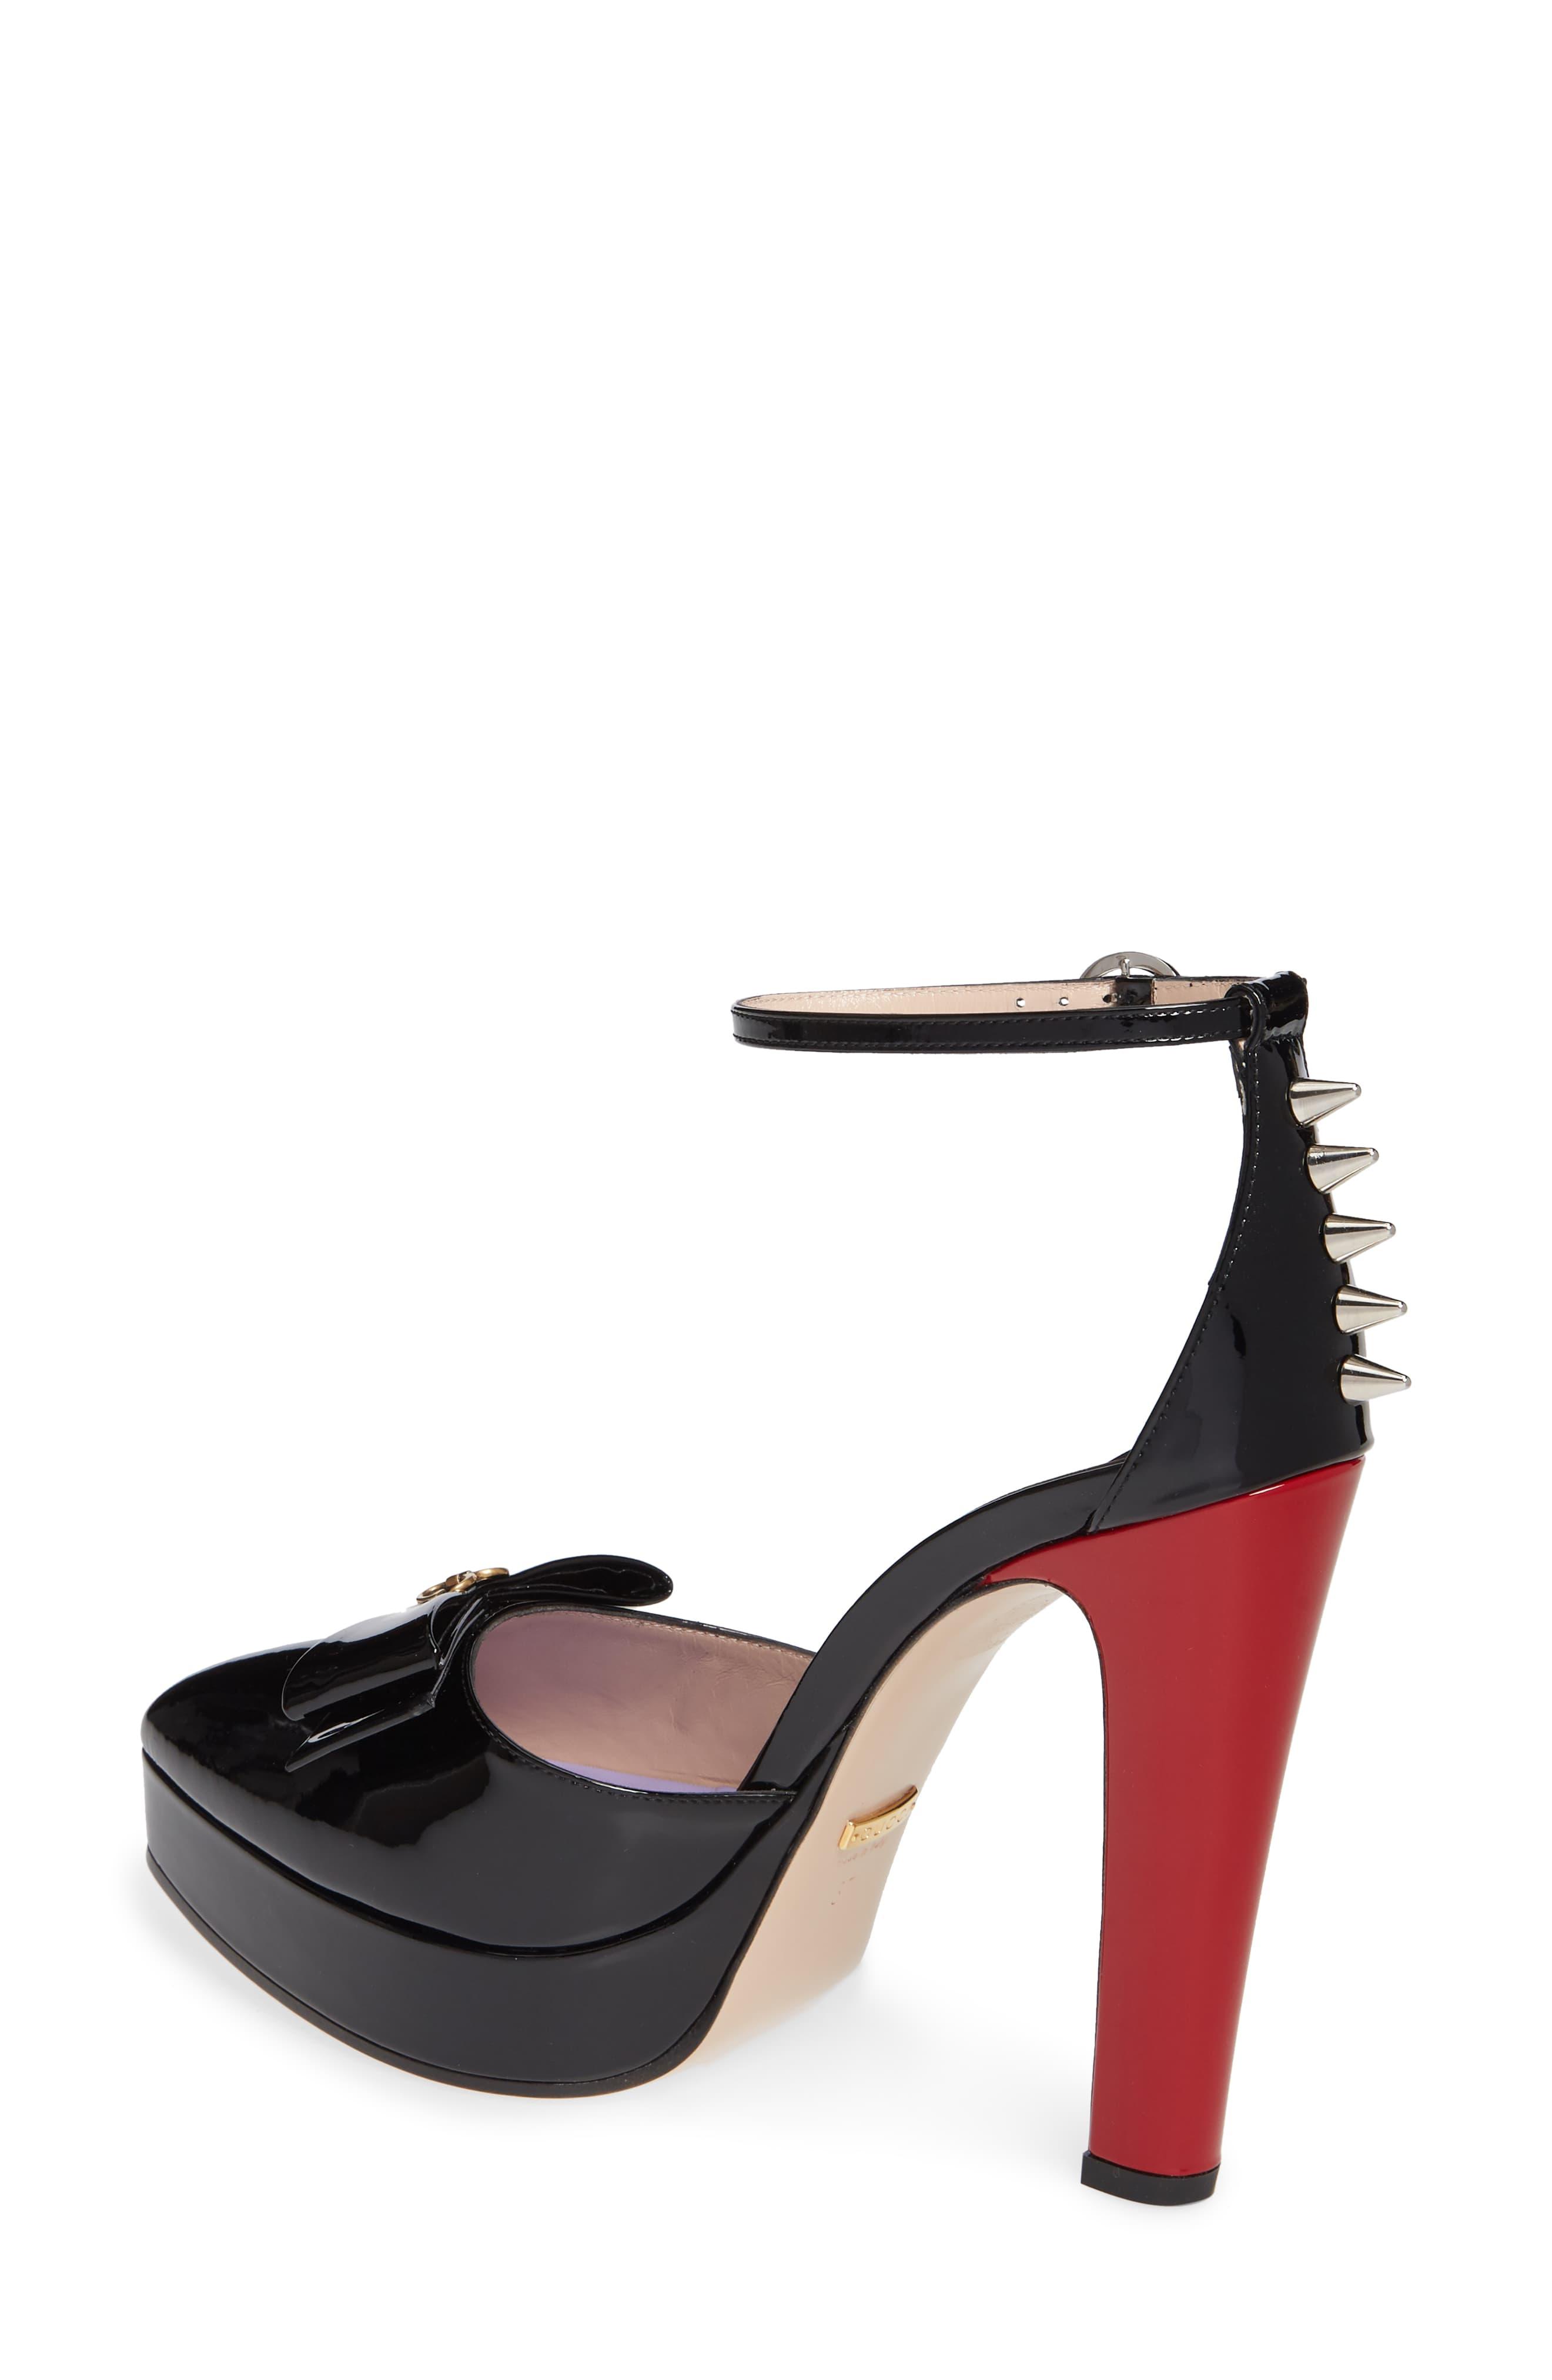 gucci heels with spikes